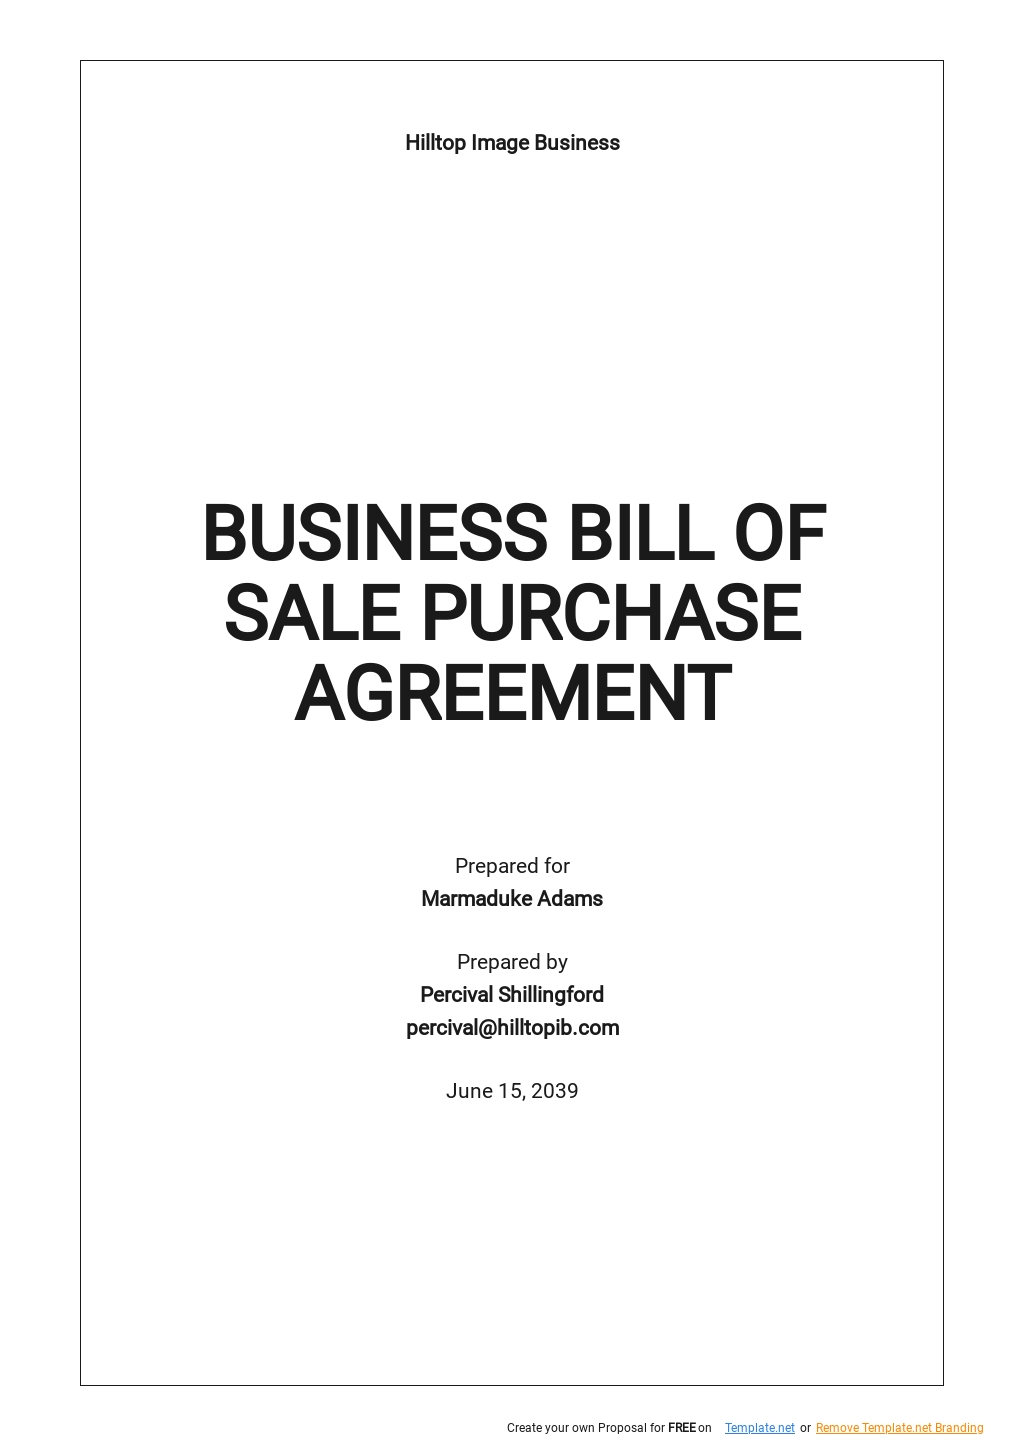 Business Bill of Sale Purchase Agreement Template.jpe